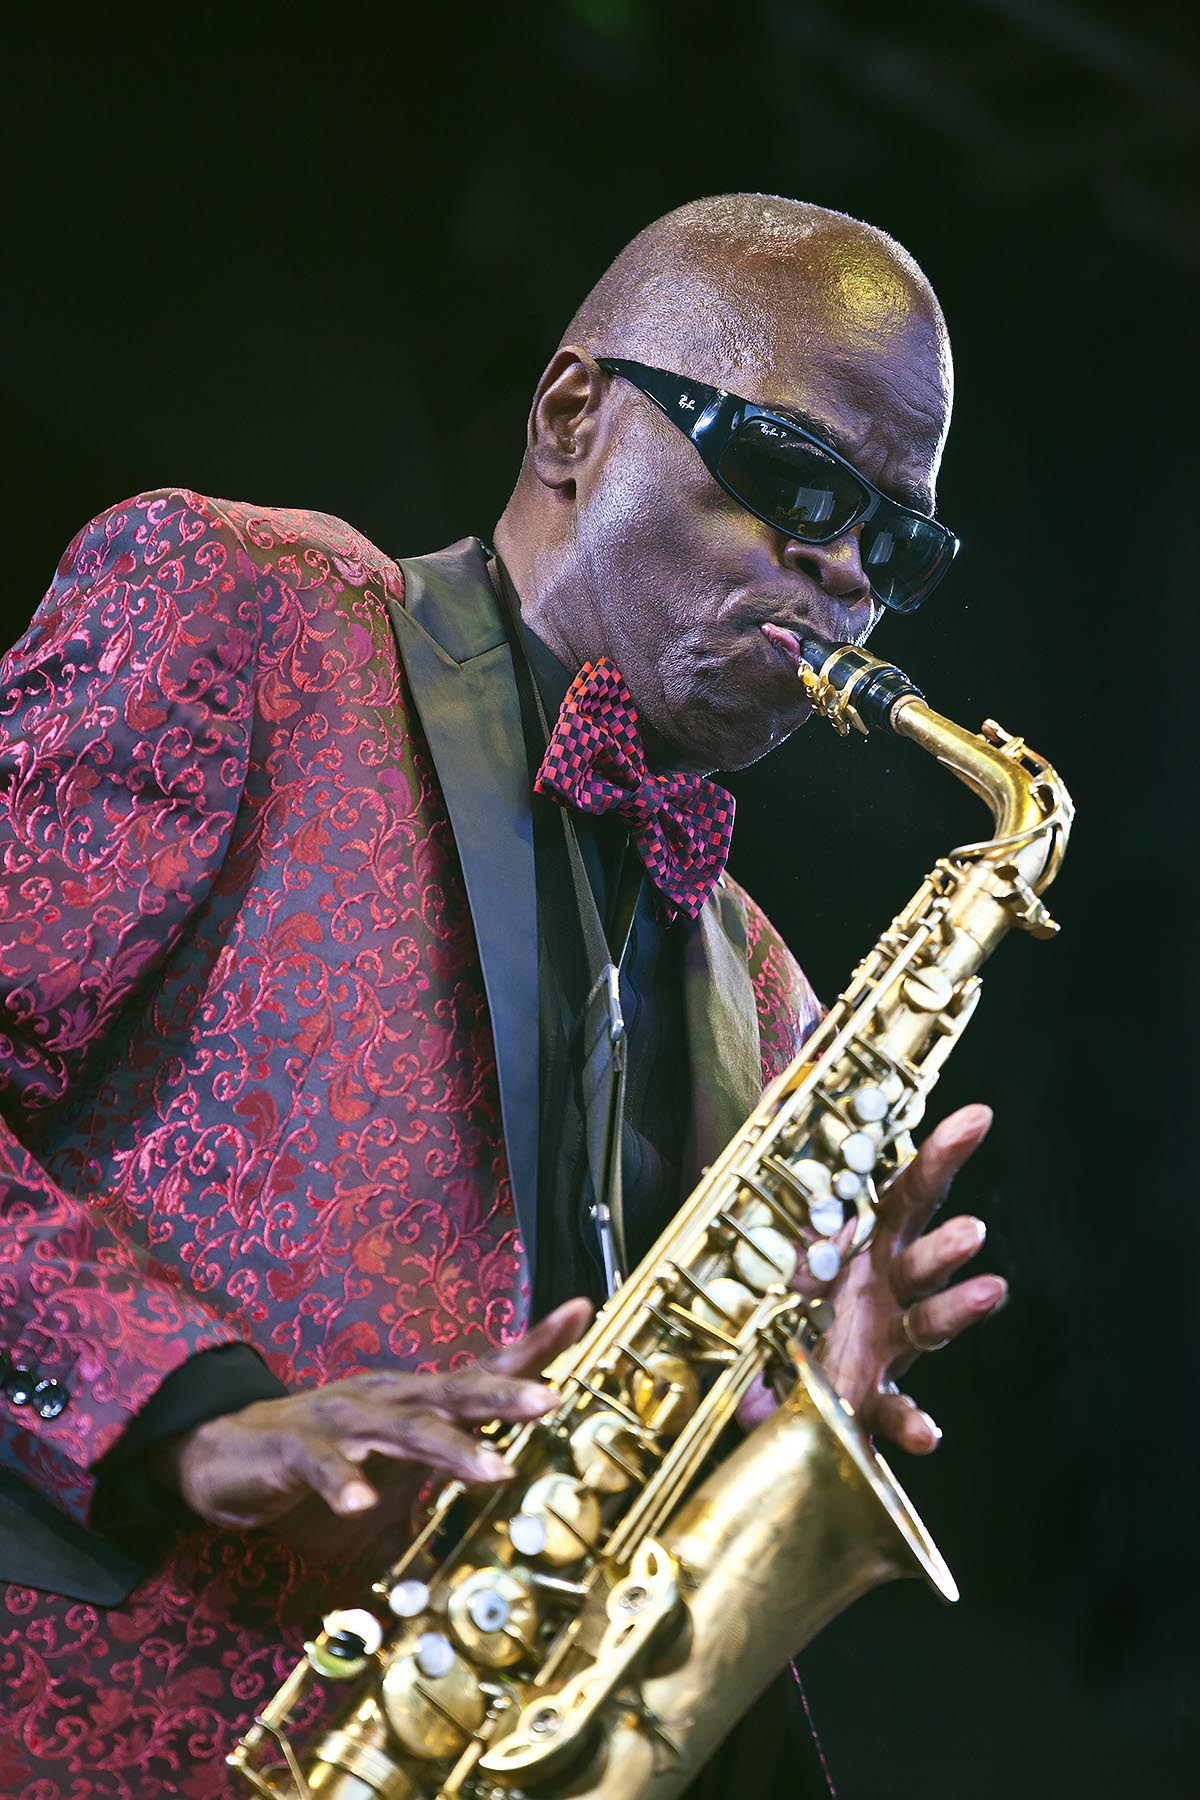 MACEO PARKER plays saxophone with the RAY CHARLES ORCHESTRA during the 59th MONTEEY JAZZ FESTIVAL - CALIFORNIA